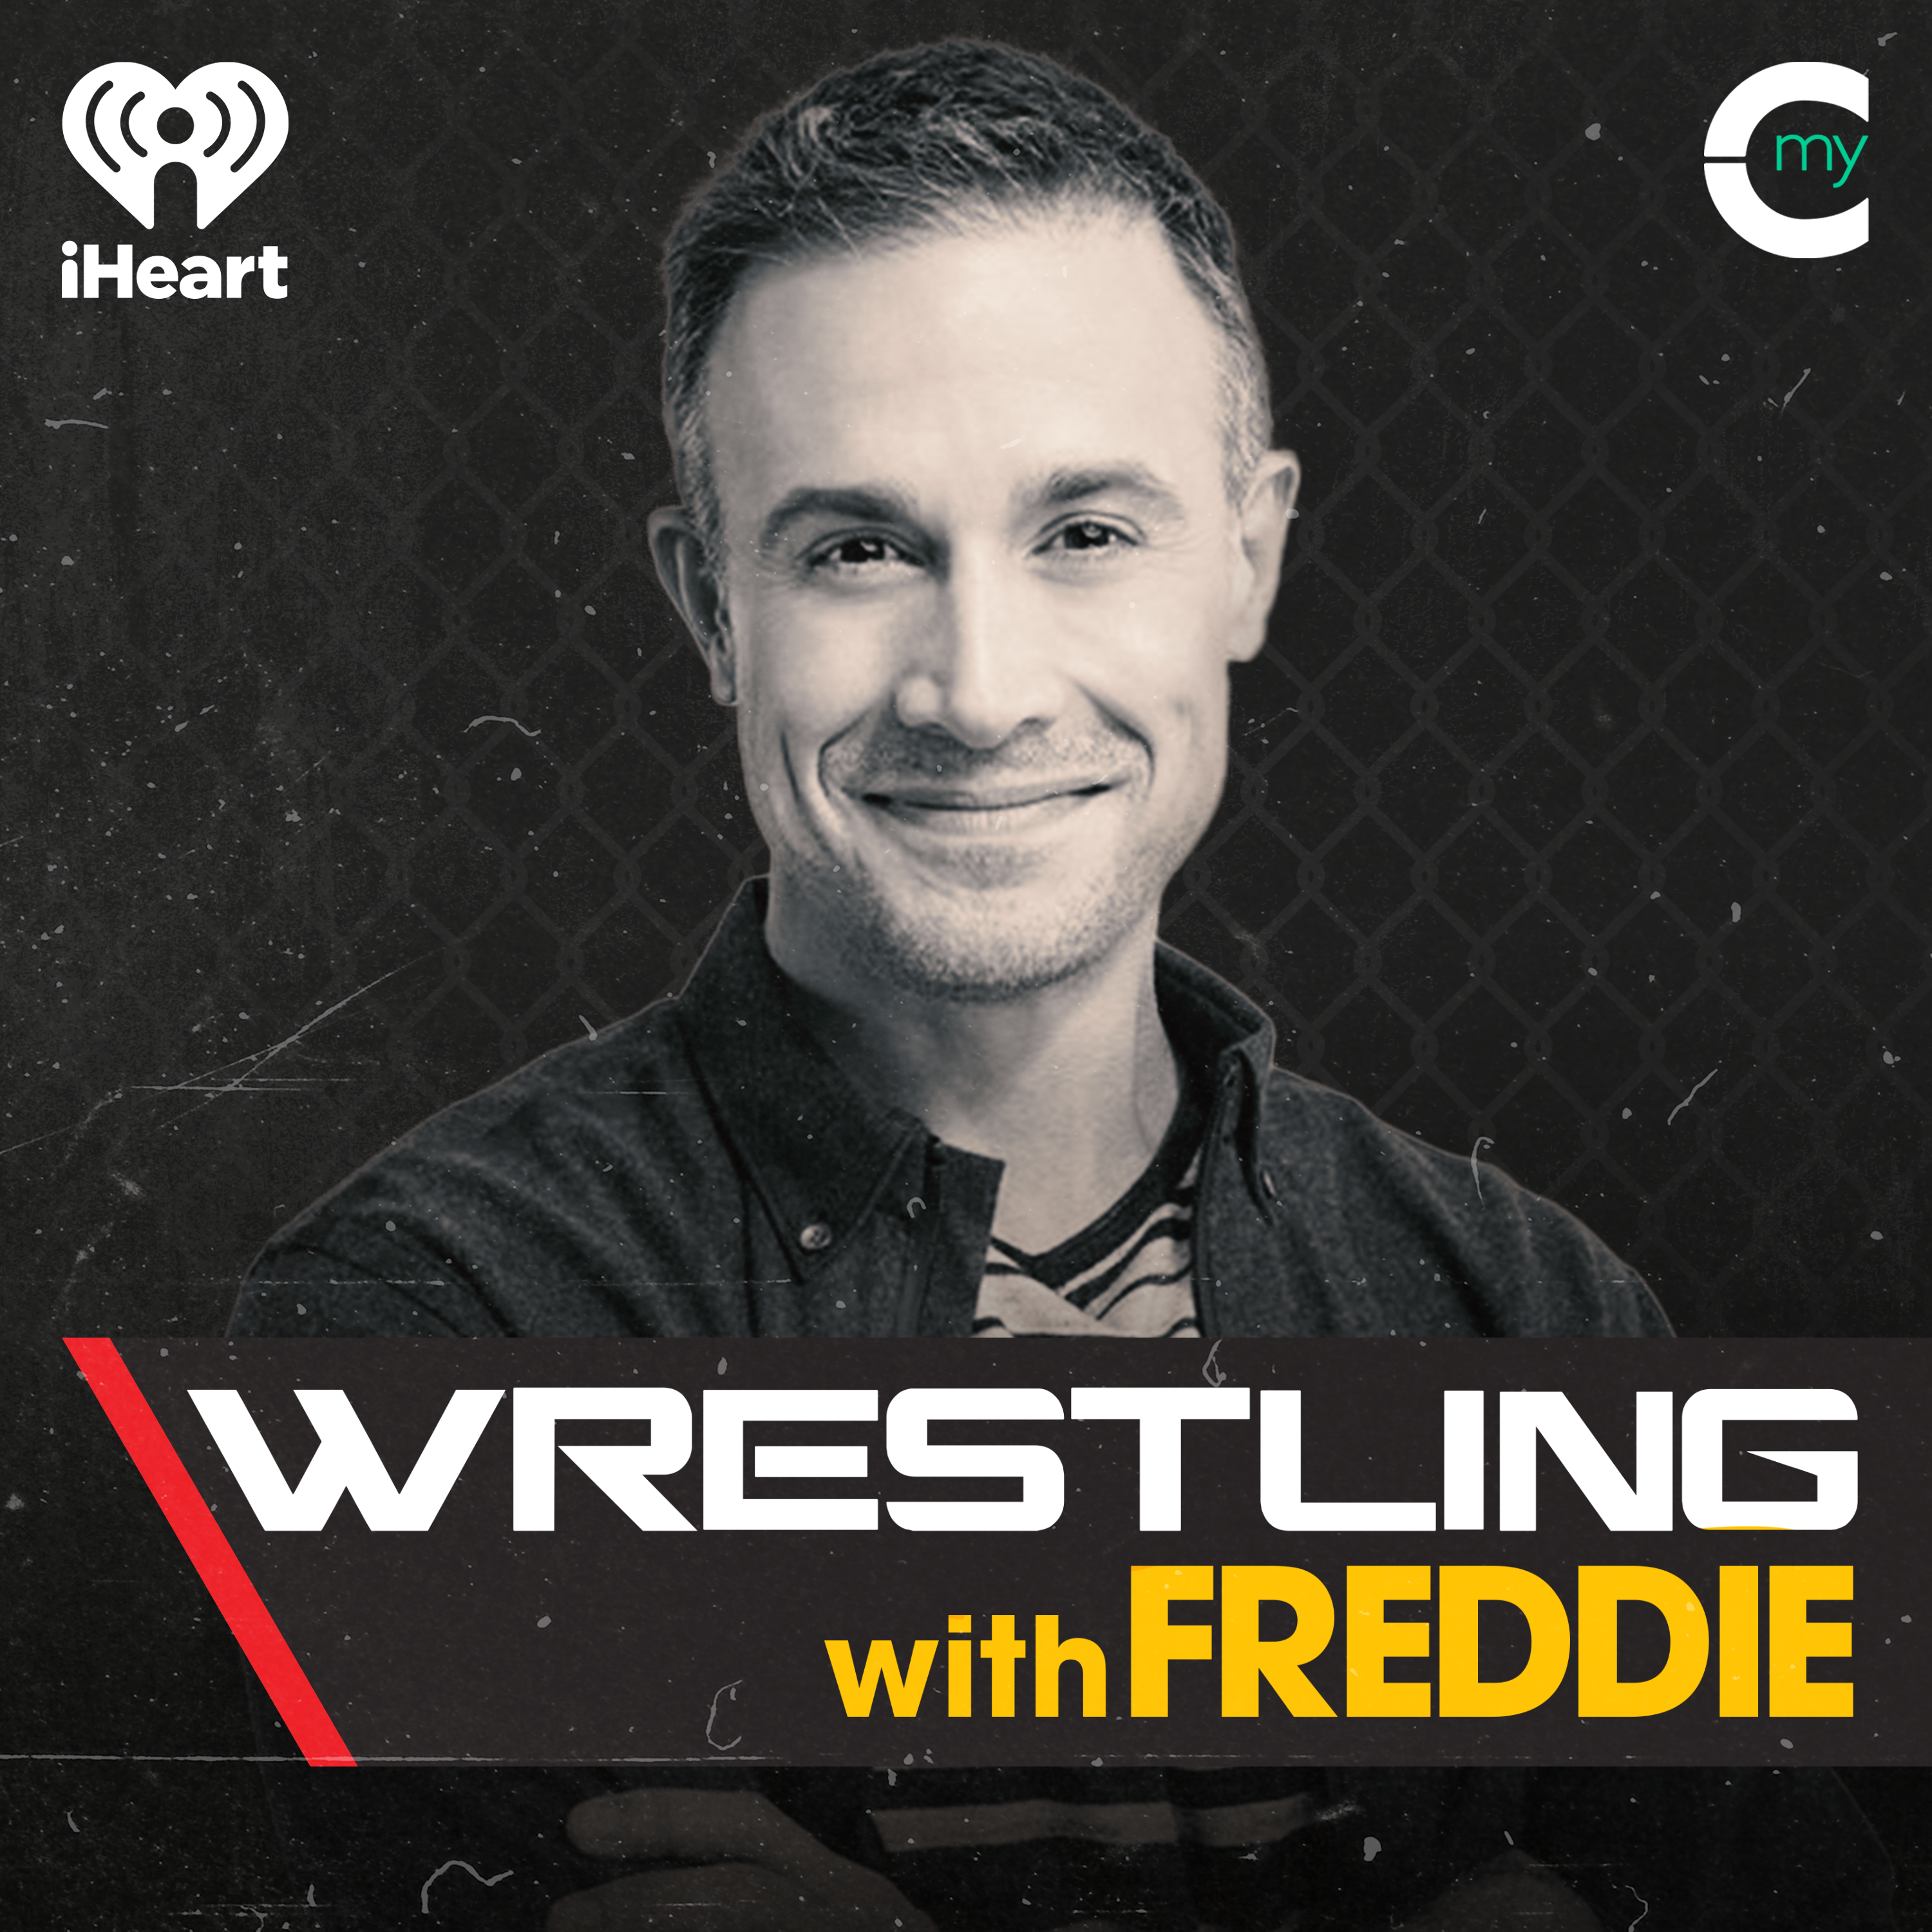 Welcome to the First Wrestling With Freddie Awards Show